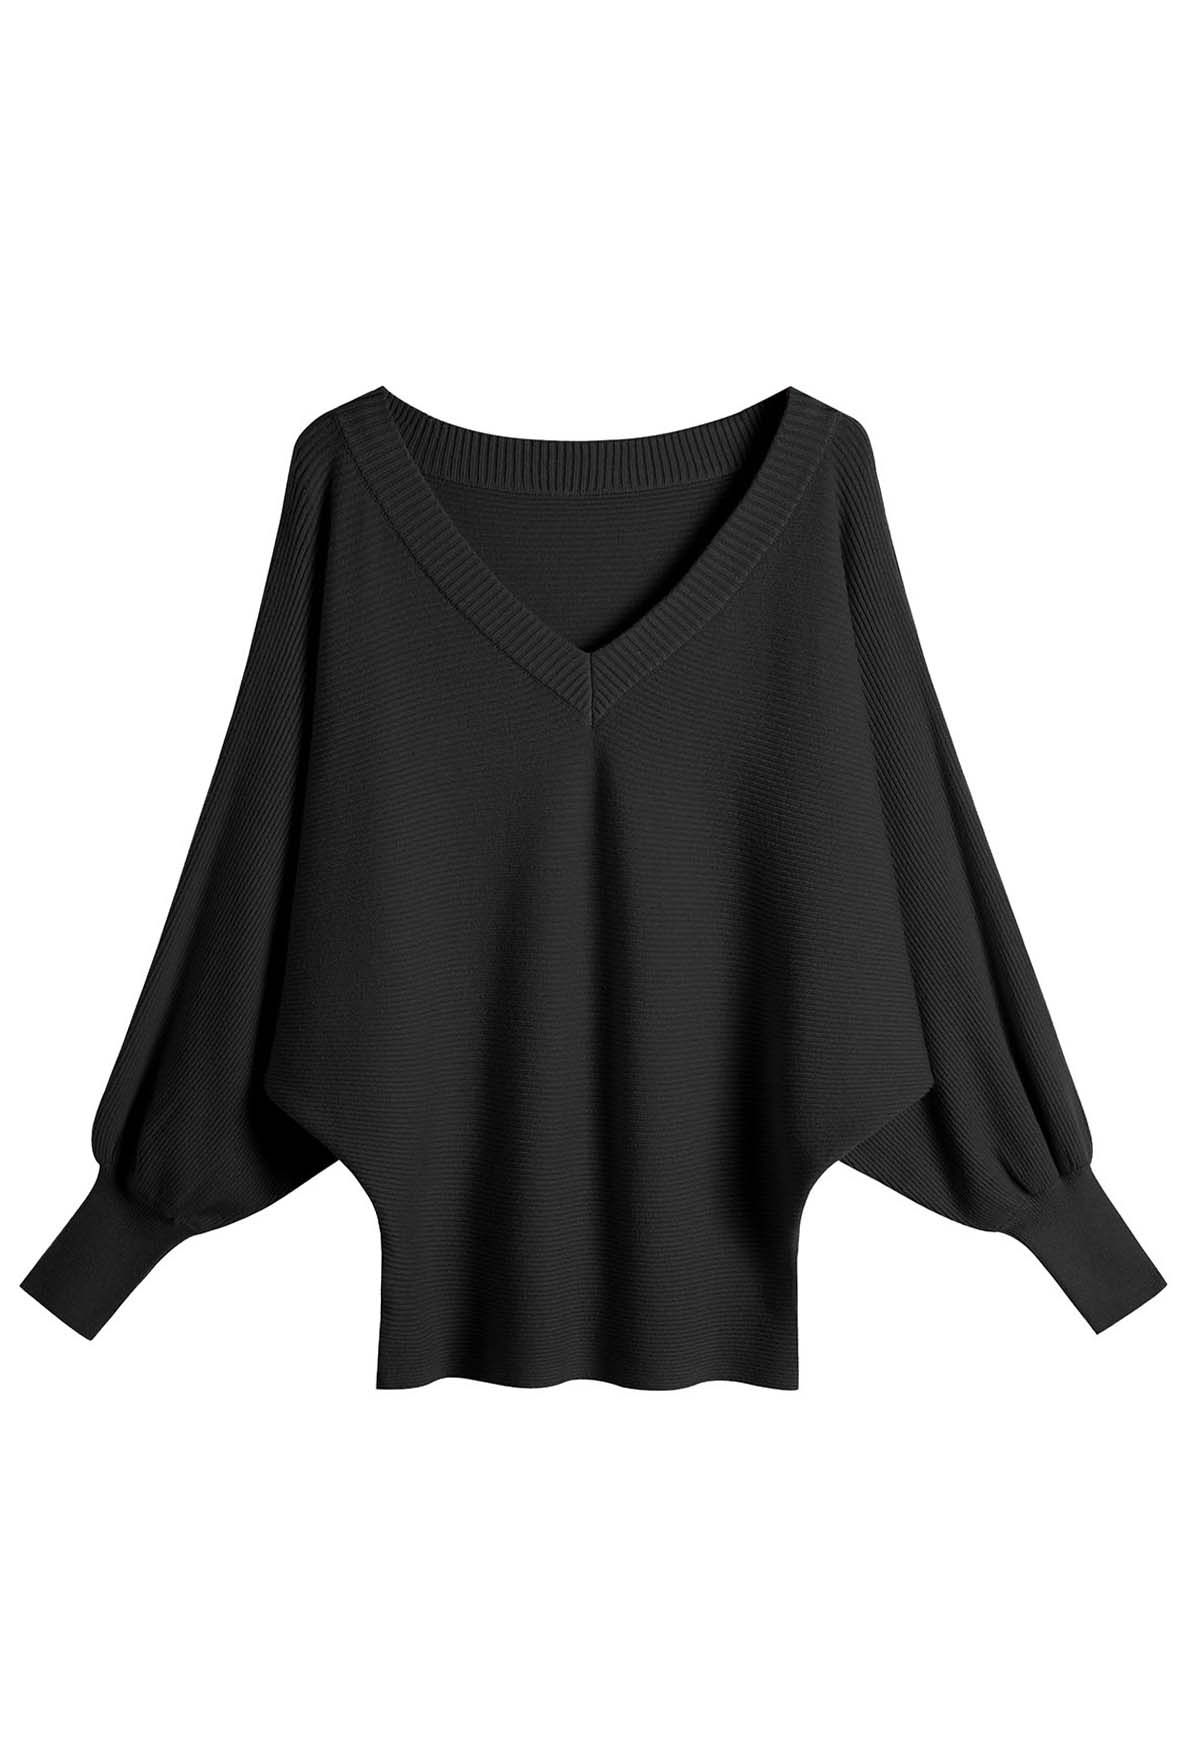 Chicwish V-Neck Batwing Sleeves Pullover Knit Sweater in Black Black L-XL